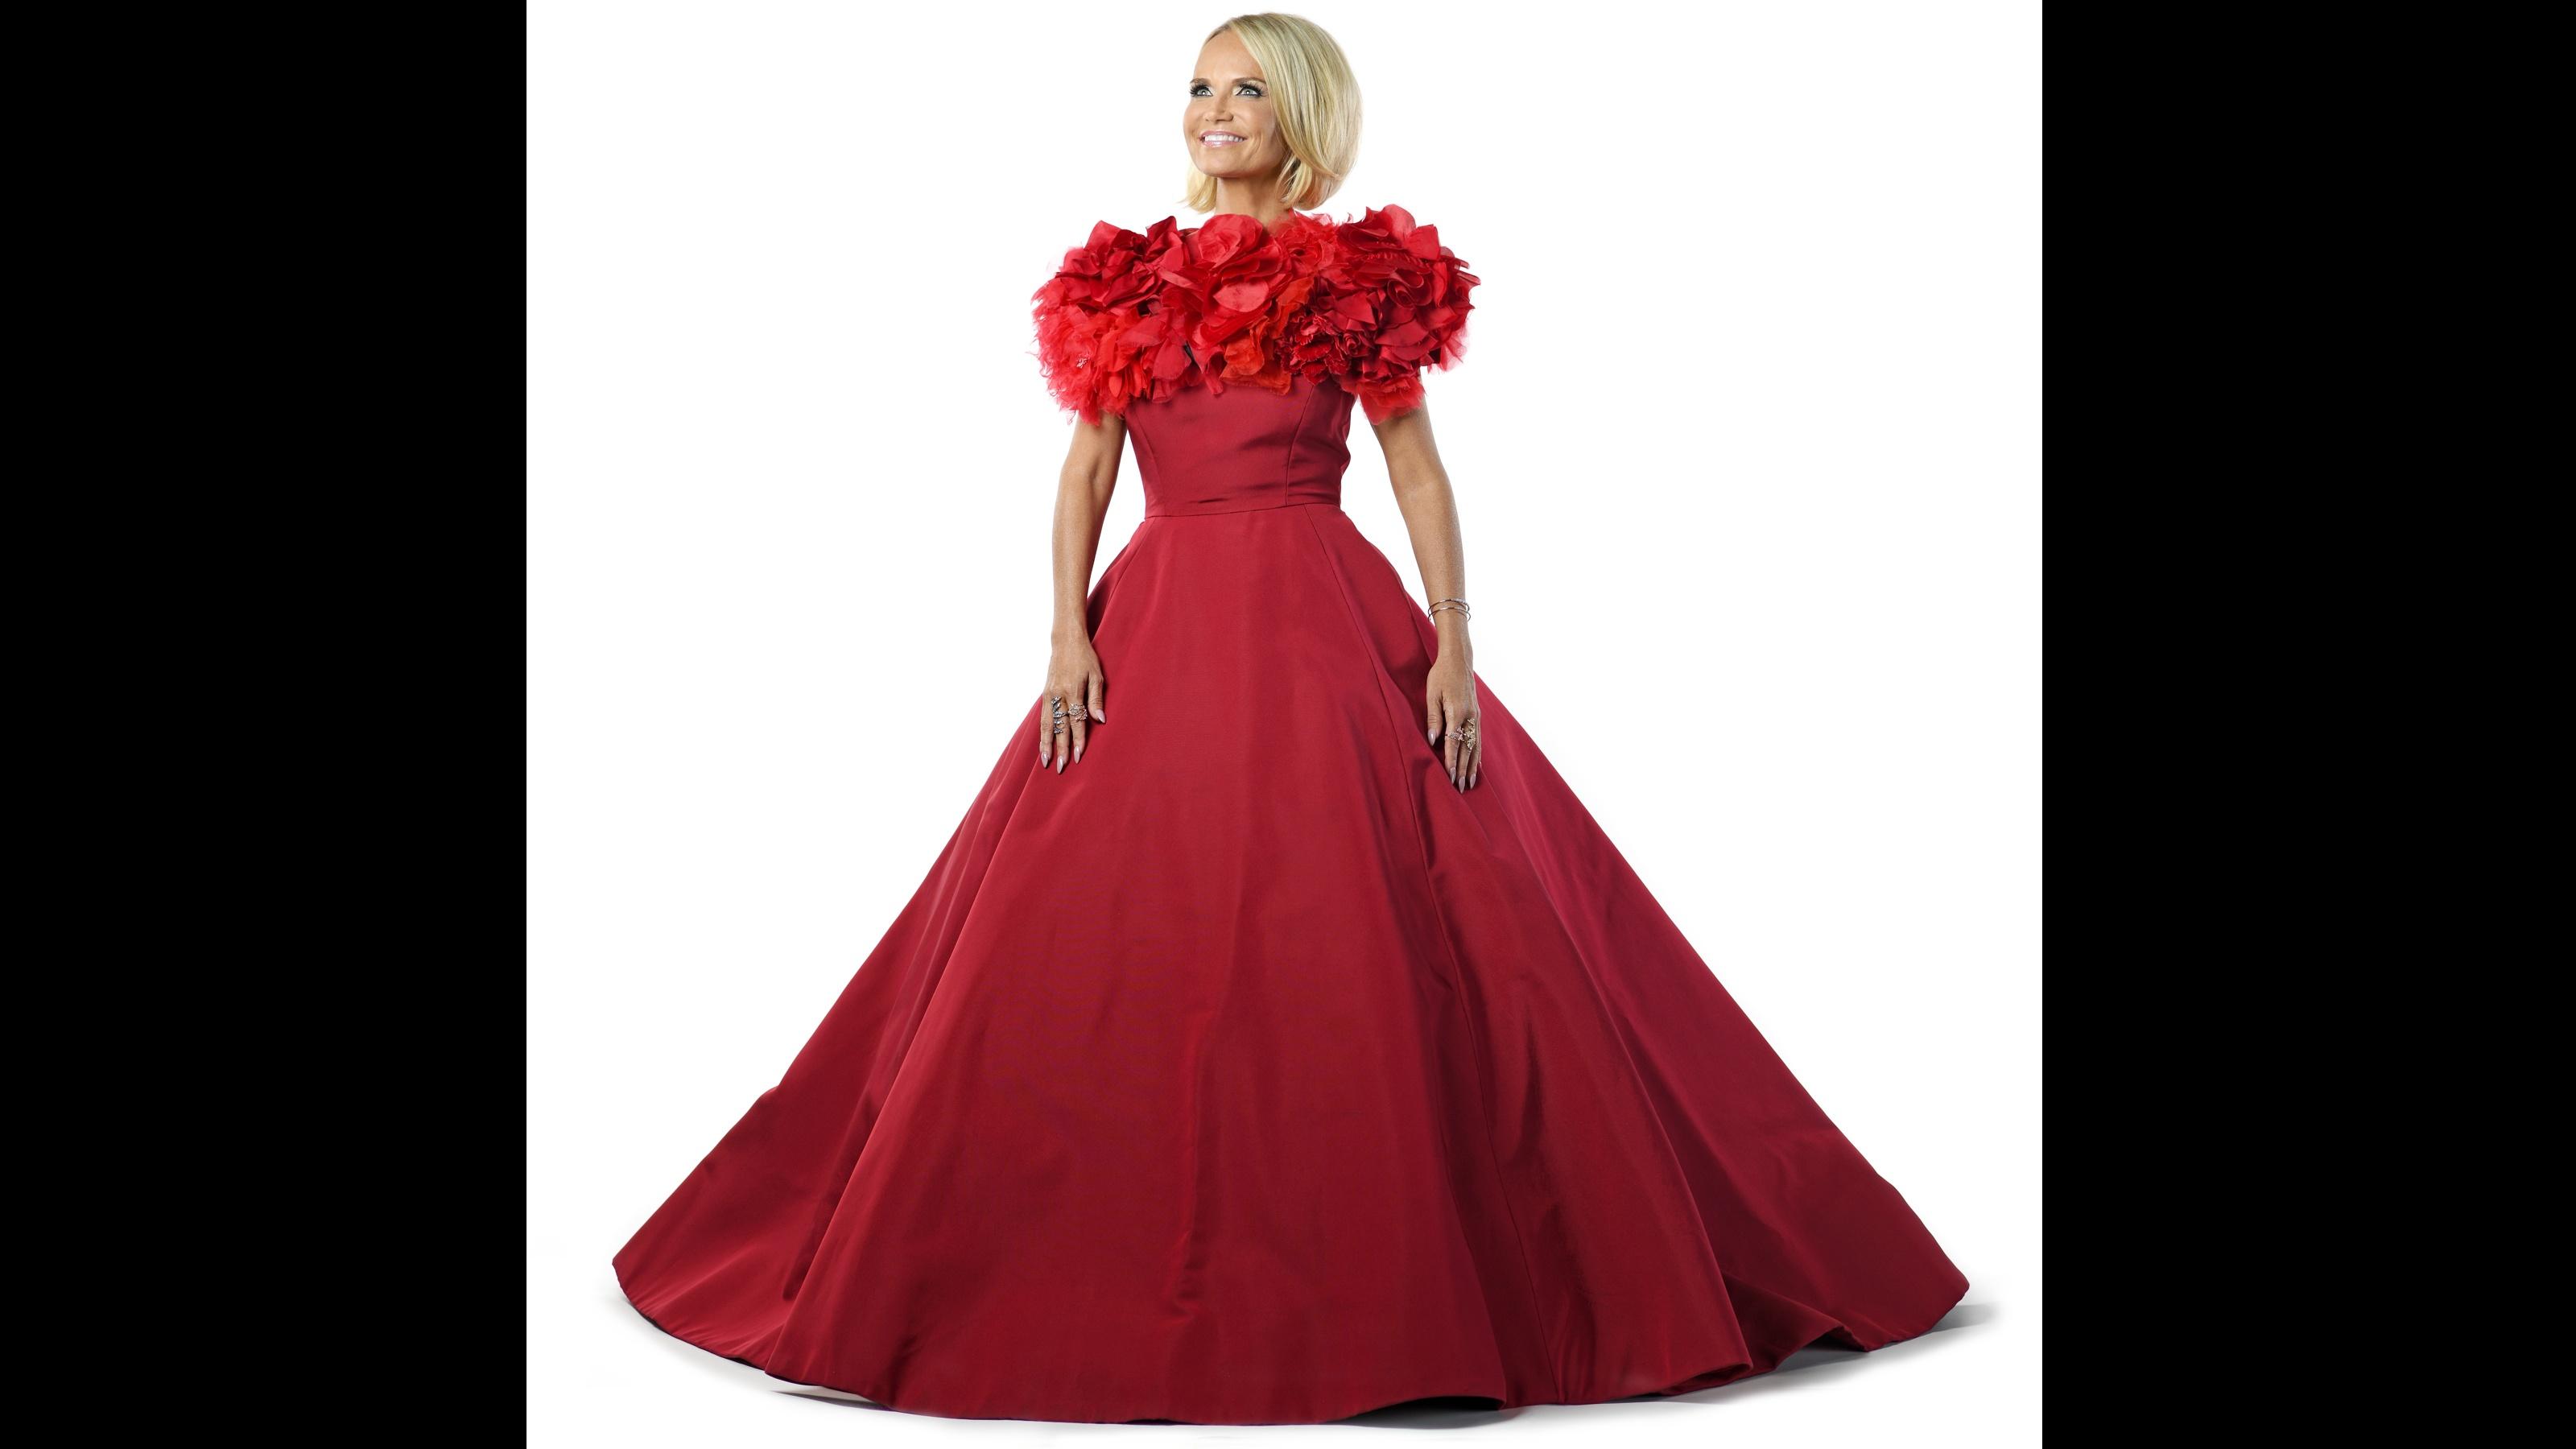 Kristin Chenoweth stands, smiling, in a red dress in front of a white background.